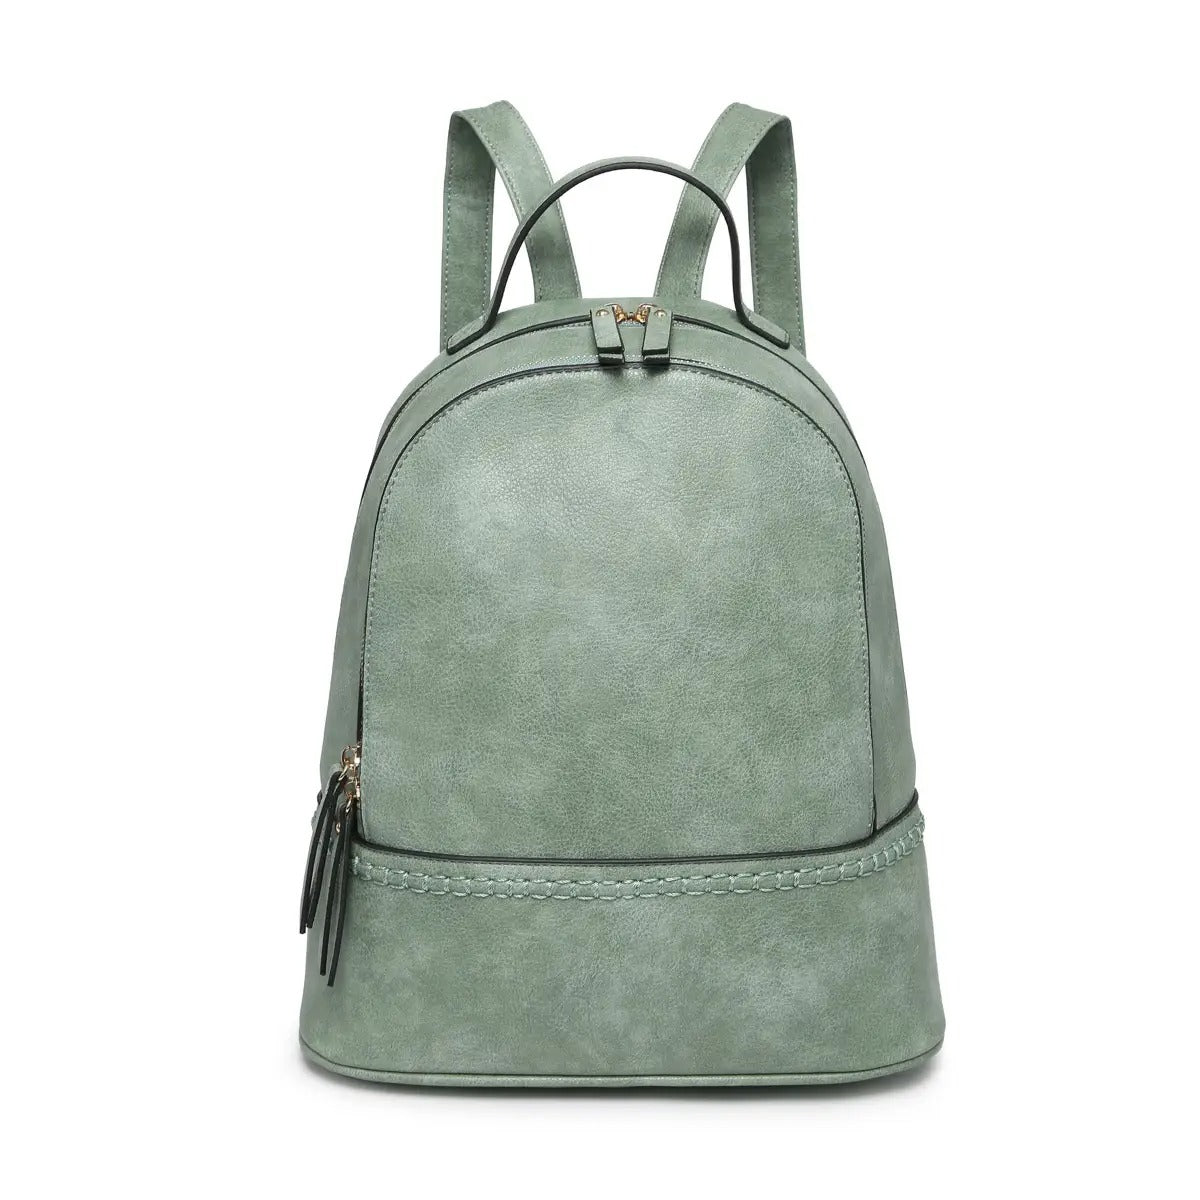 Marty 2 Compartment Backpack with Stitch Detail